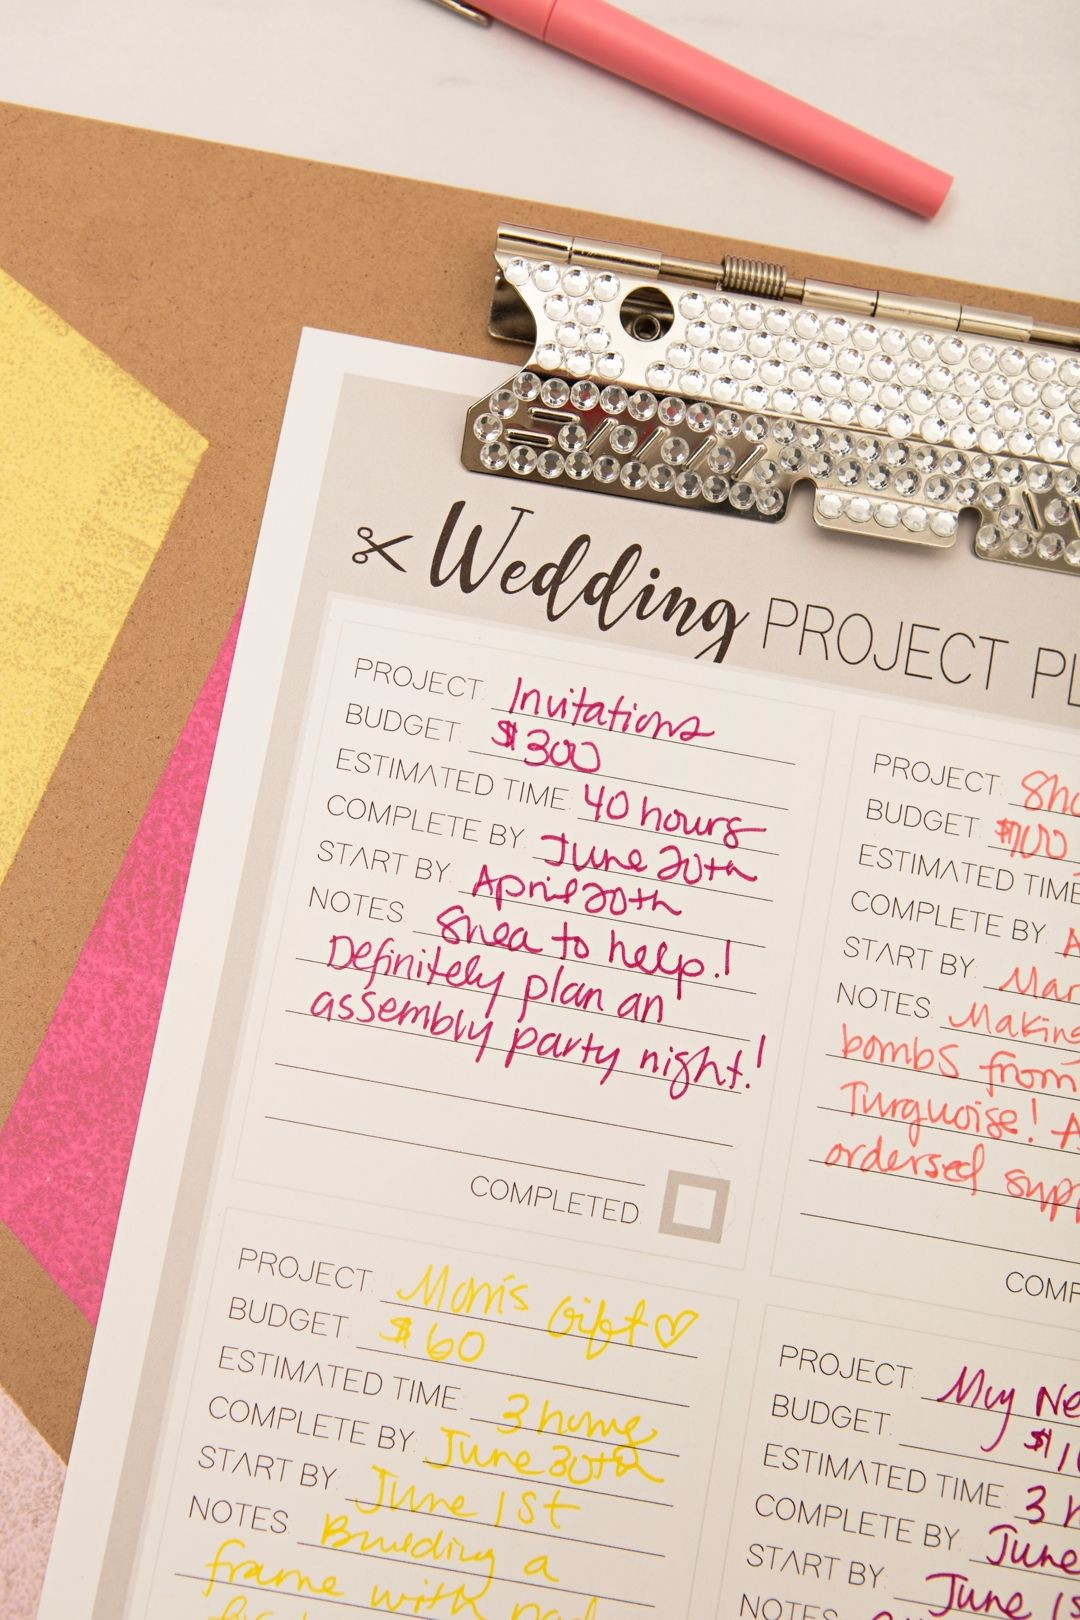 Wedding Planner Binder DIY
 Print Out Out This DIY "Wedding Project Planner Sheet" For